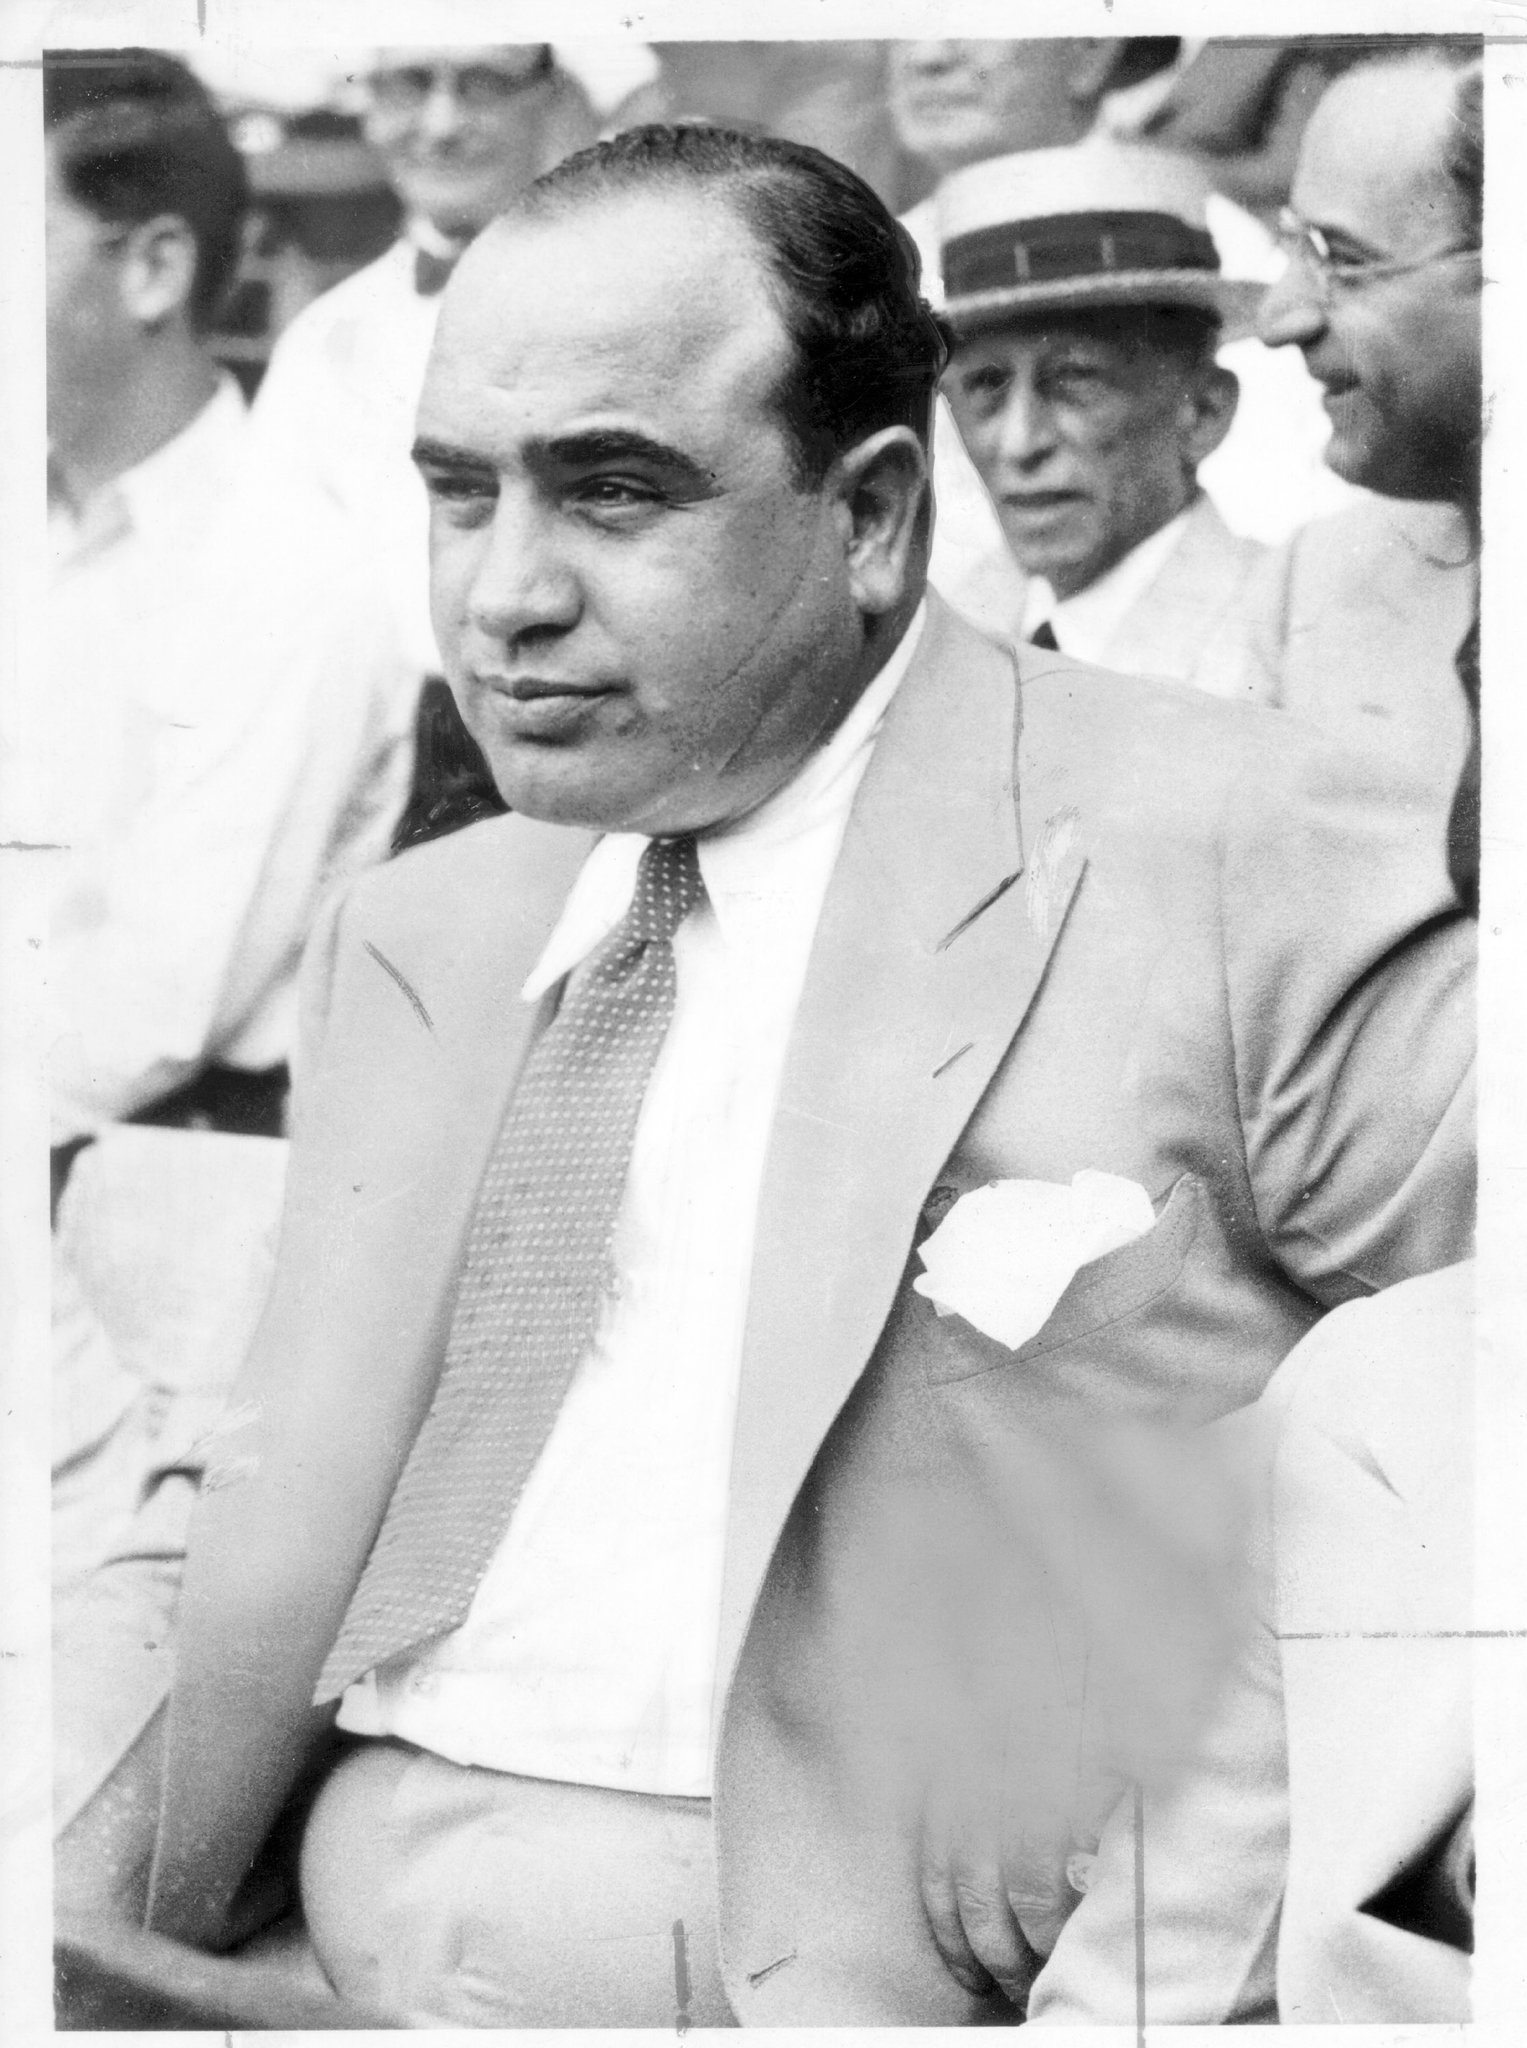 Al Capone watching baseball, with scars on view